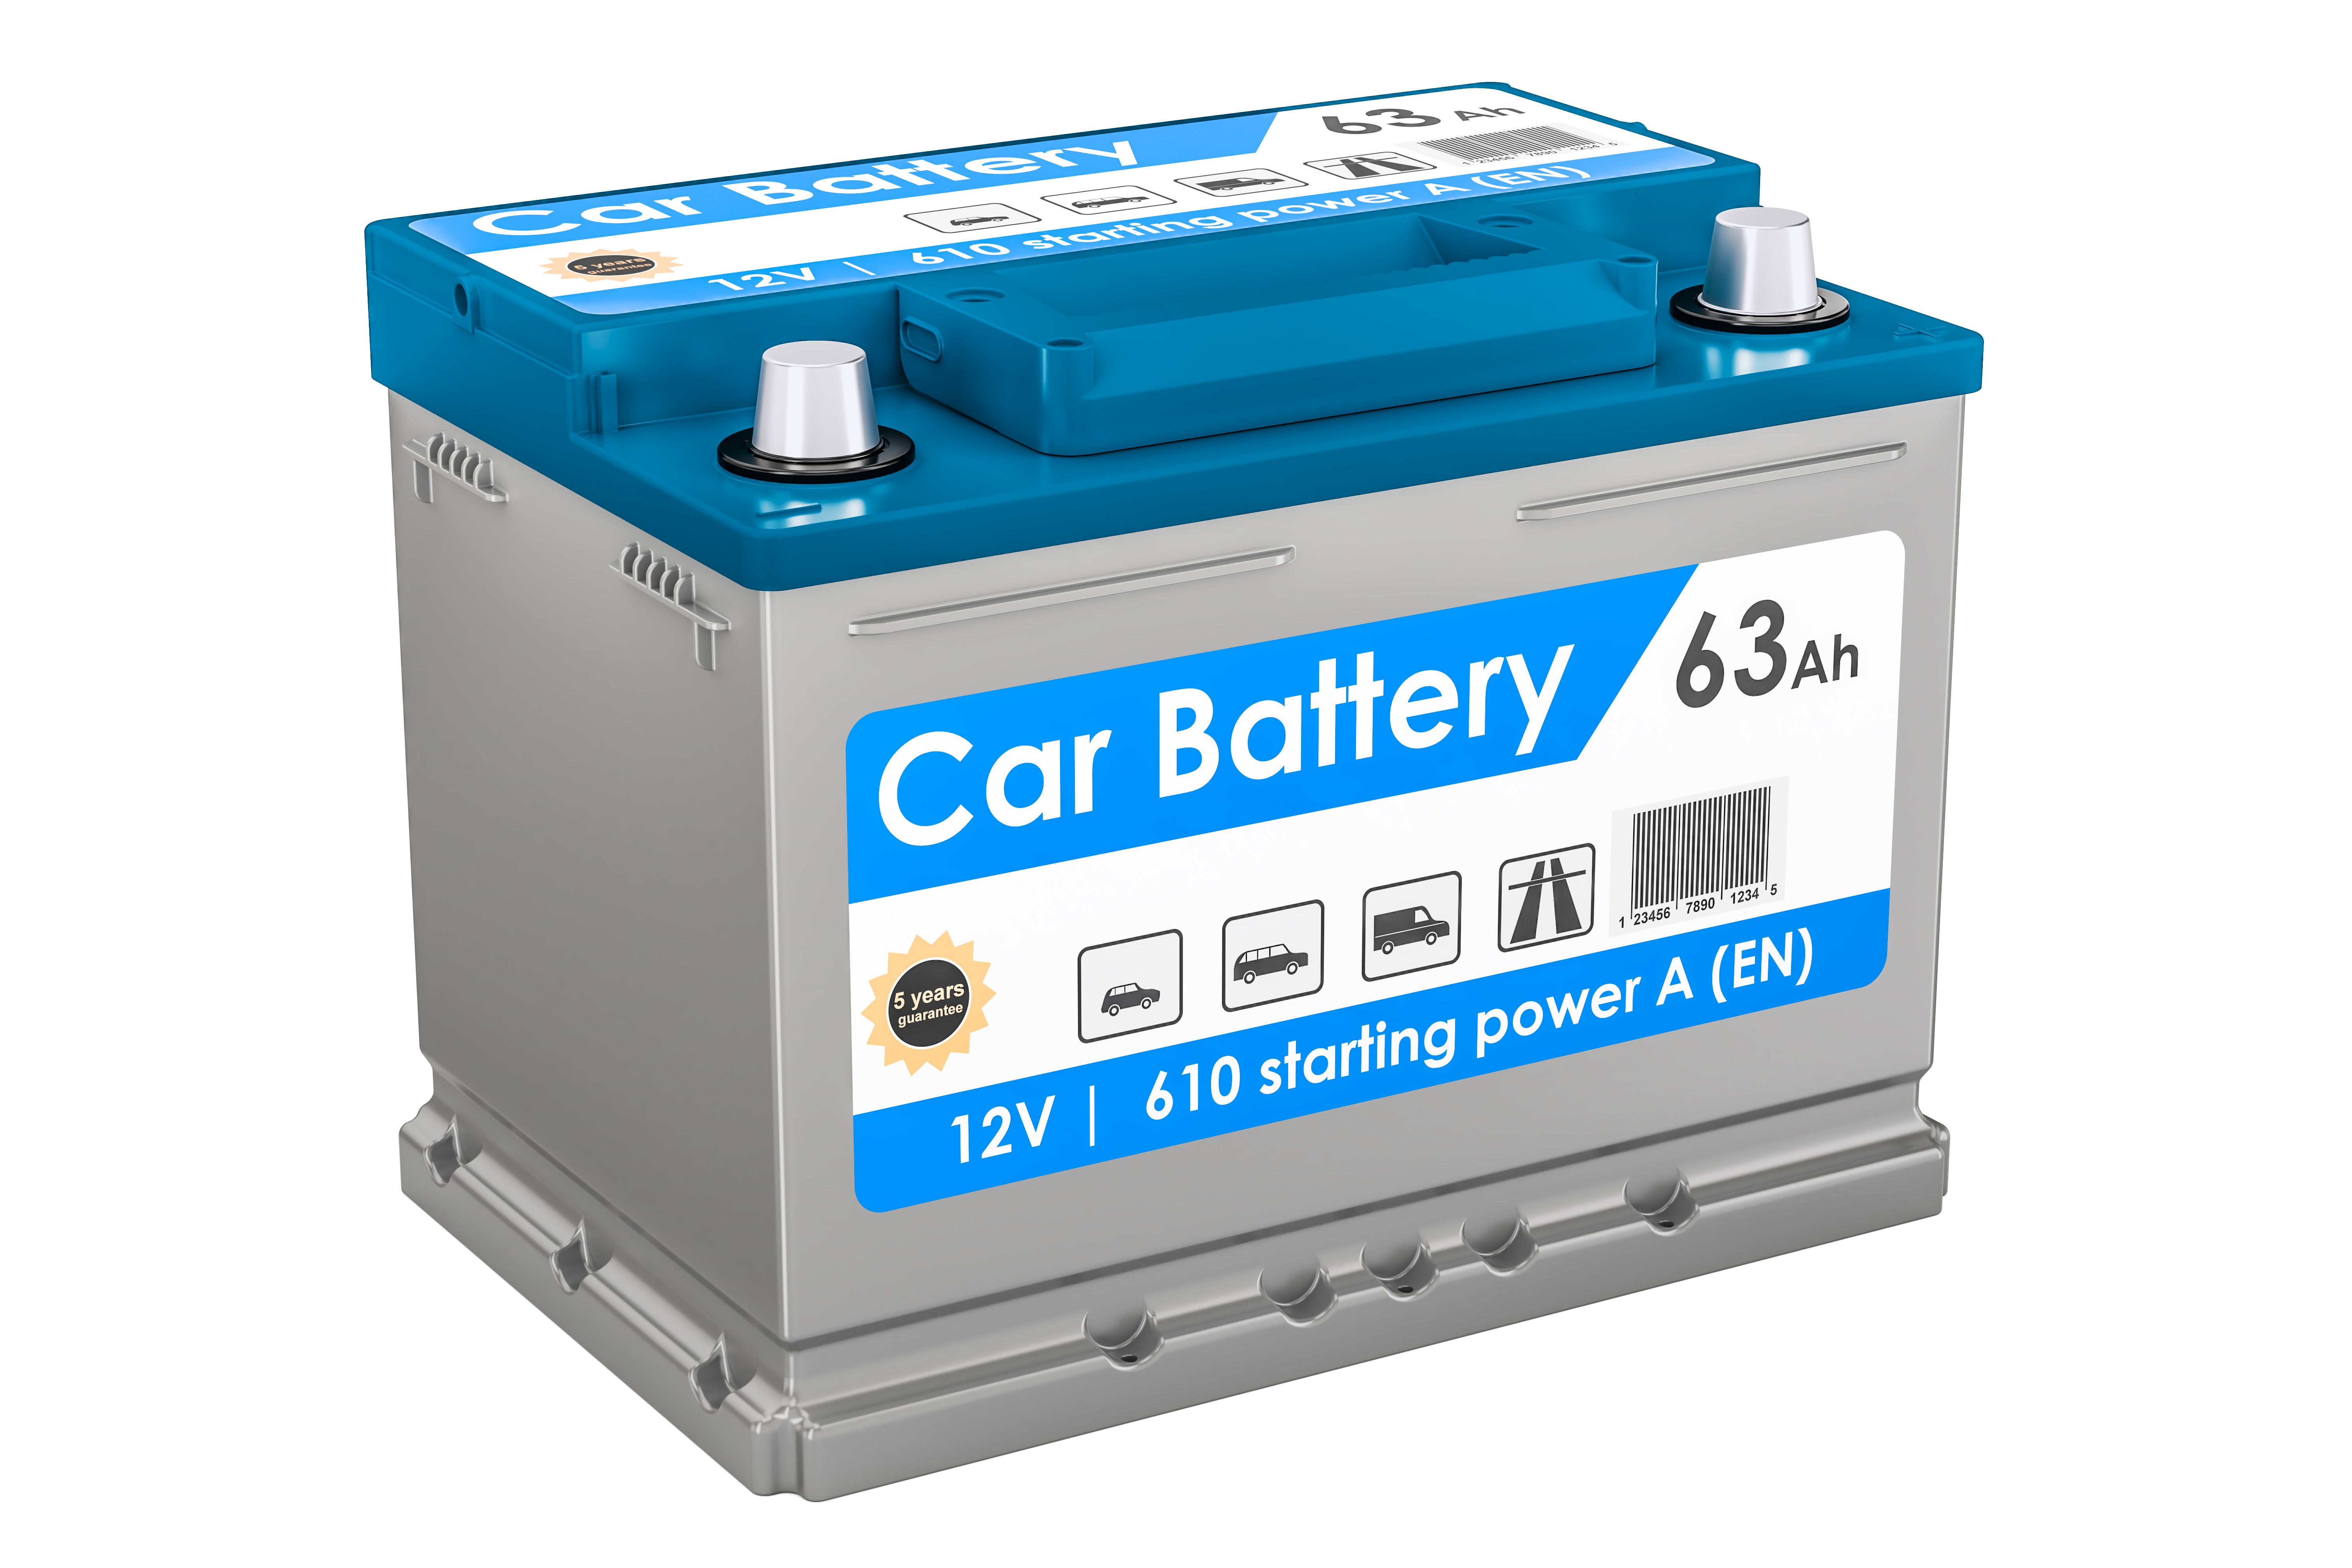 reconditioned car batteries ezbatteryreconditioning.com review